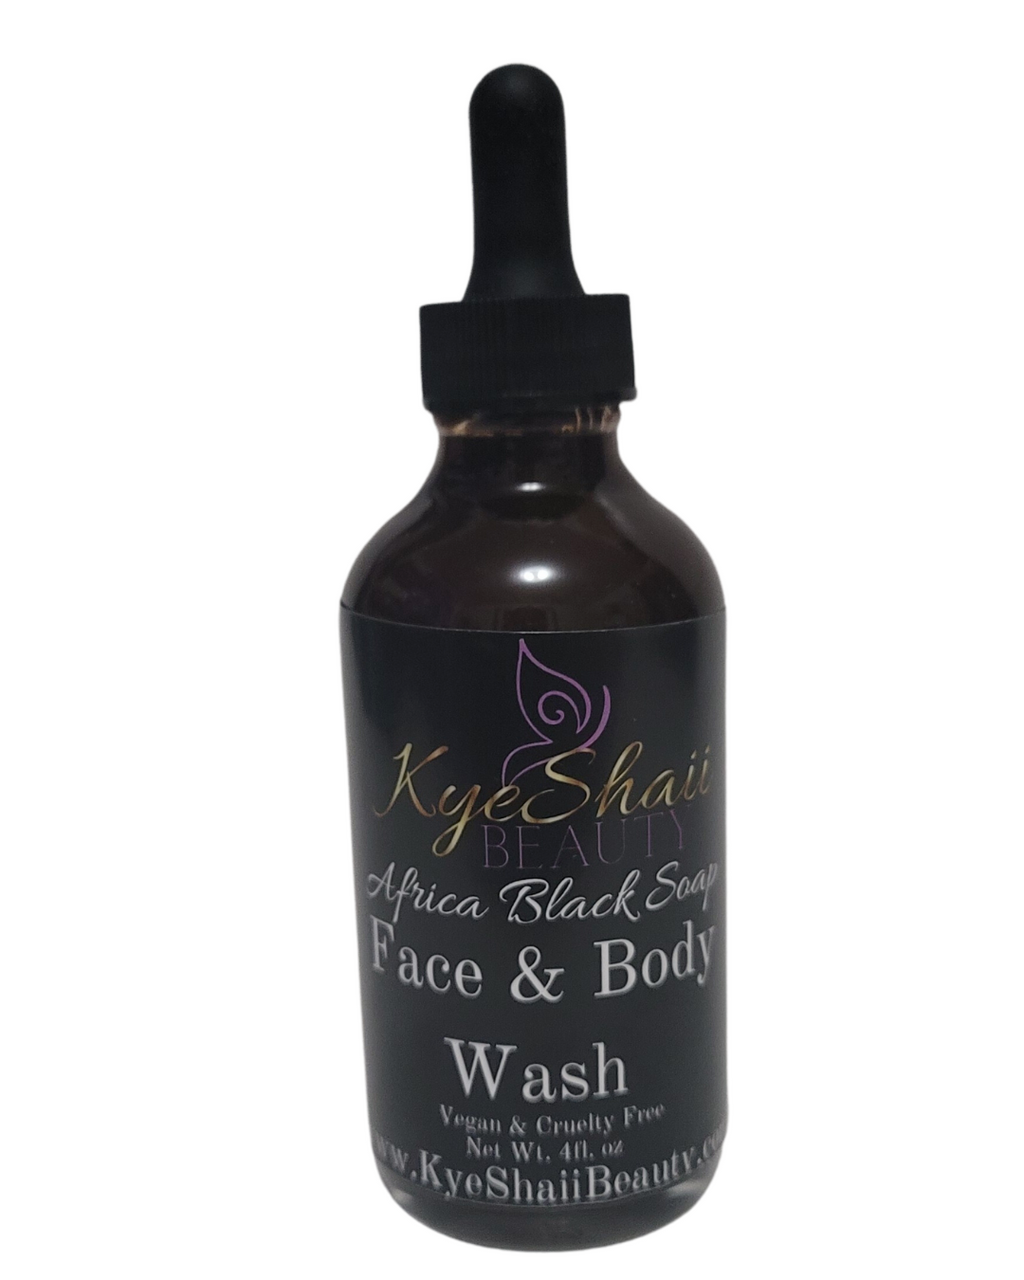 Africa Black Soap Face & Body Wash